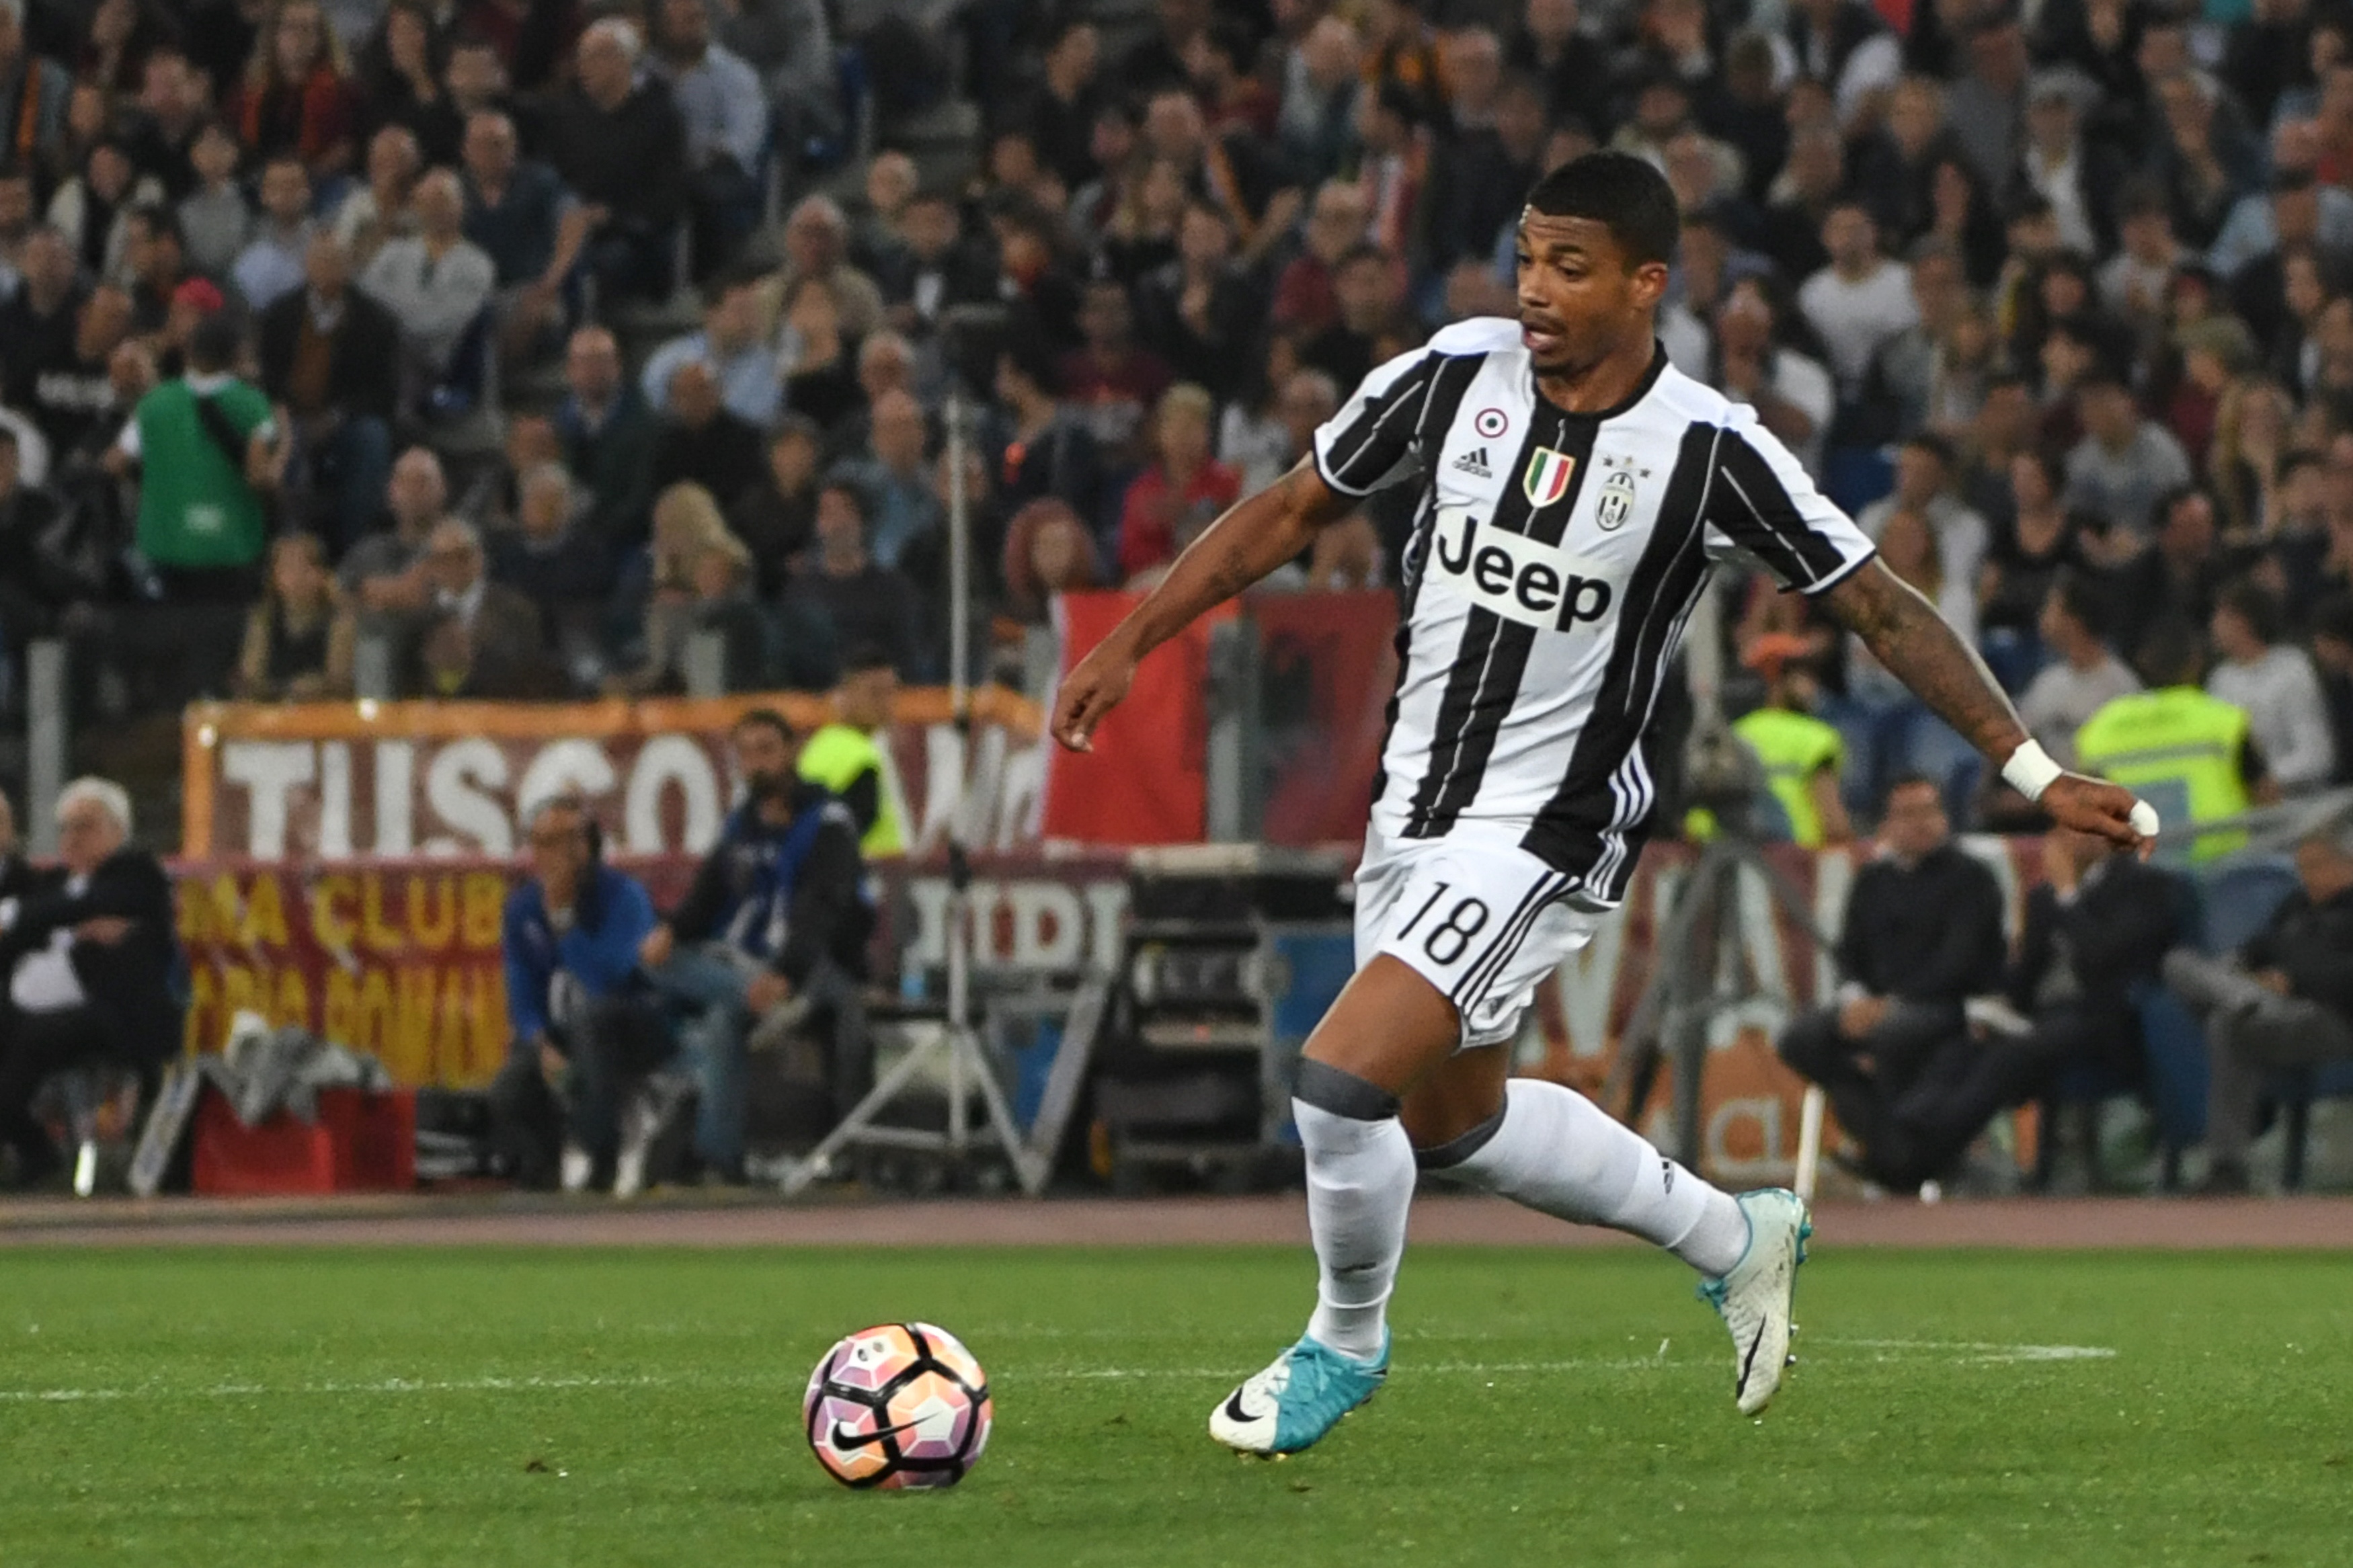 Juventus' midfielder Mario Lemina controls the ball during the Italian Serie A football match Roma vs Juventus, on May 14, 2017 at Rome's Olympic stadium. / AFP PHOTO / Andreas SOLARO        (Photo credit should read ANDREAS SOLARO/AFP/Getty Images)